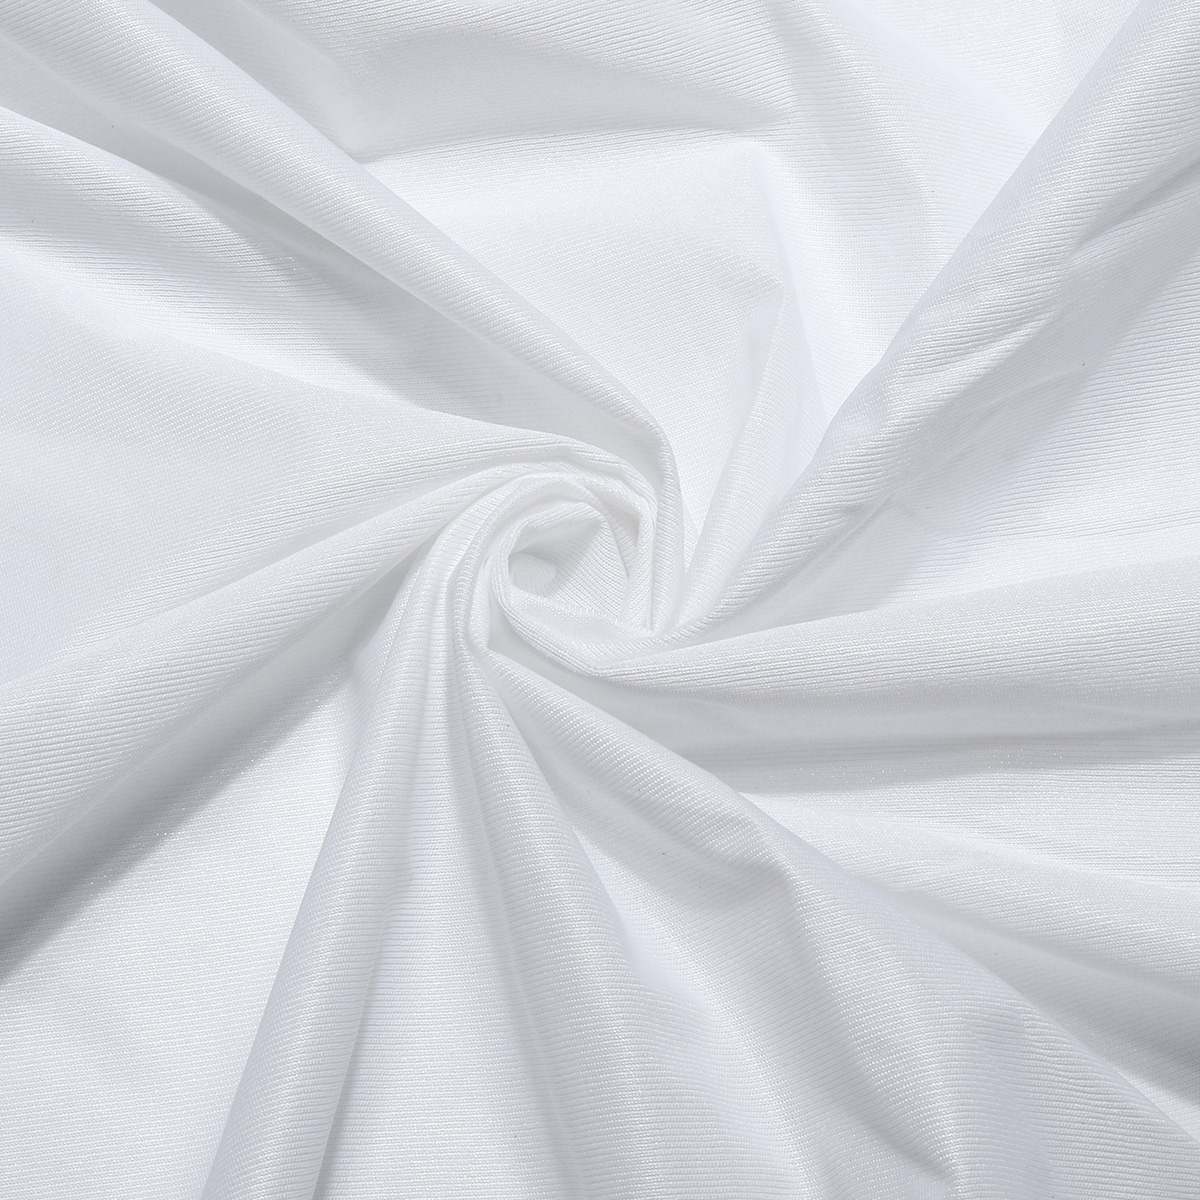 Mattress Protector Cover Waterproof Anti Dust Mite Breathable Fitted Bed Sheet Machine Washable 160x200+30cm/200x200+30cm